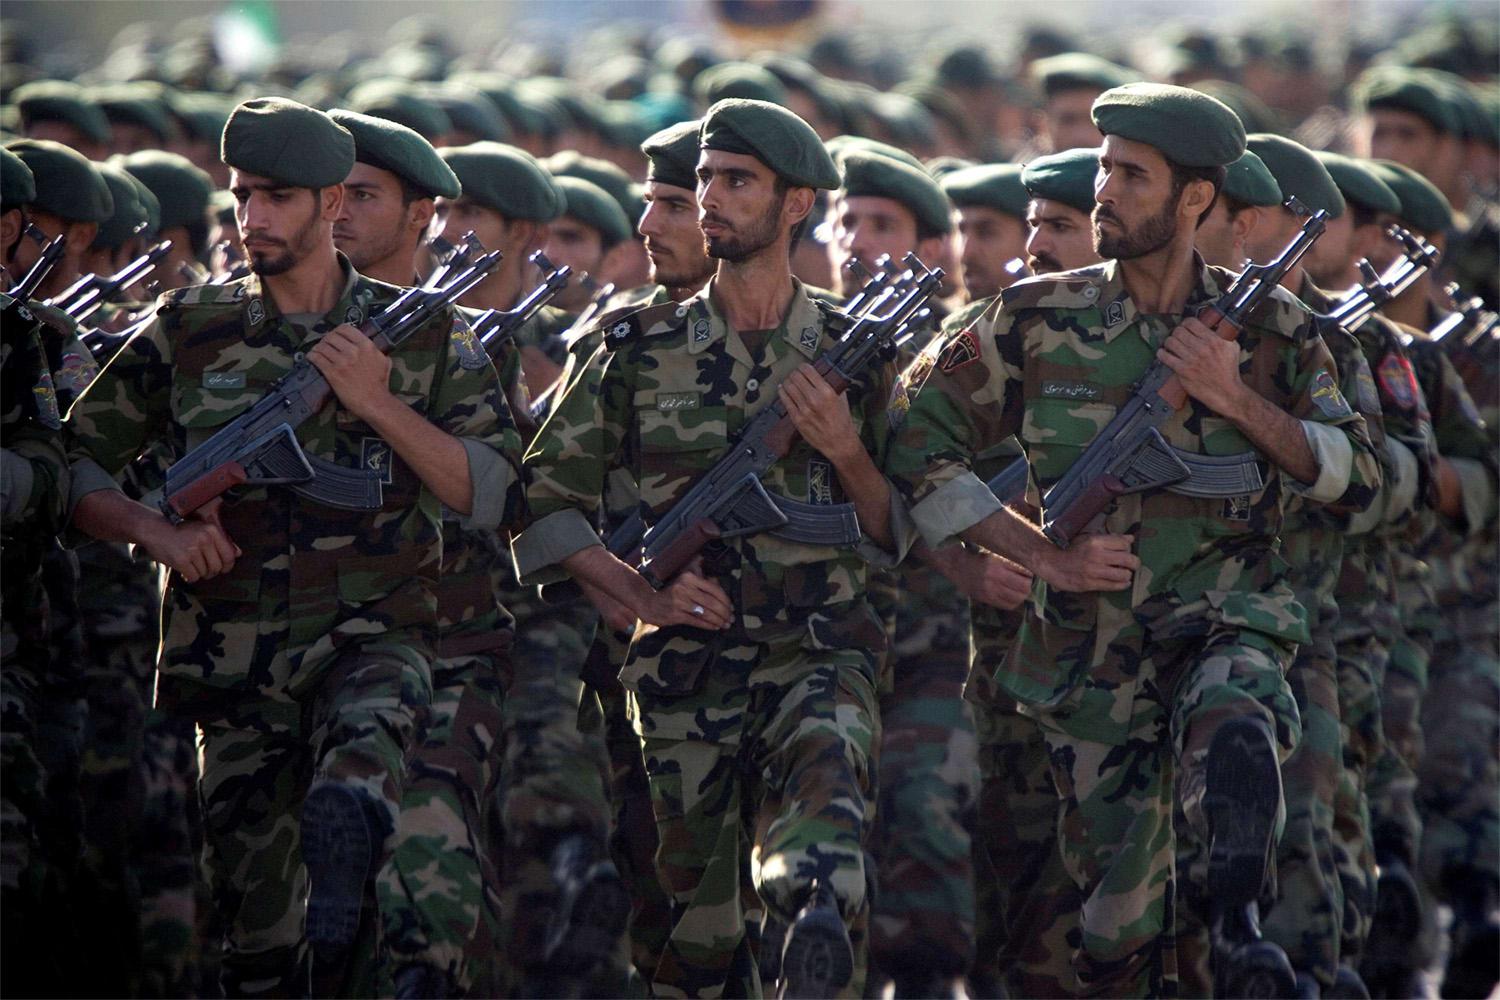 The Revolutionary Guard says Israel will "pay for this crime"